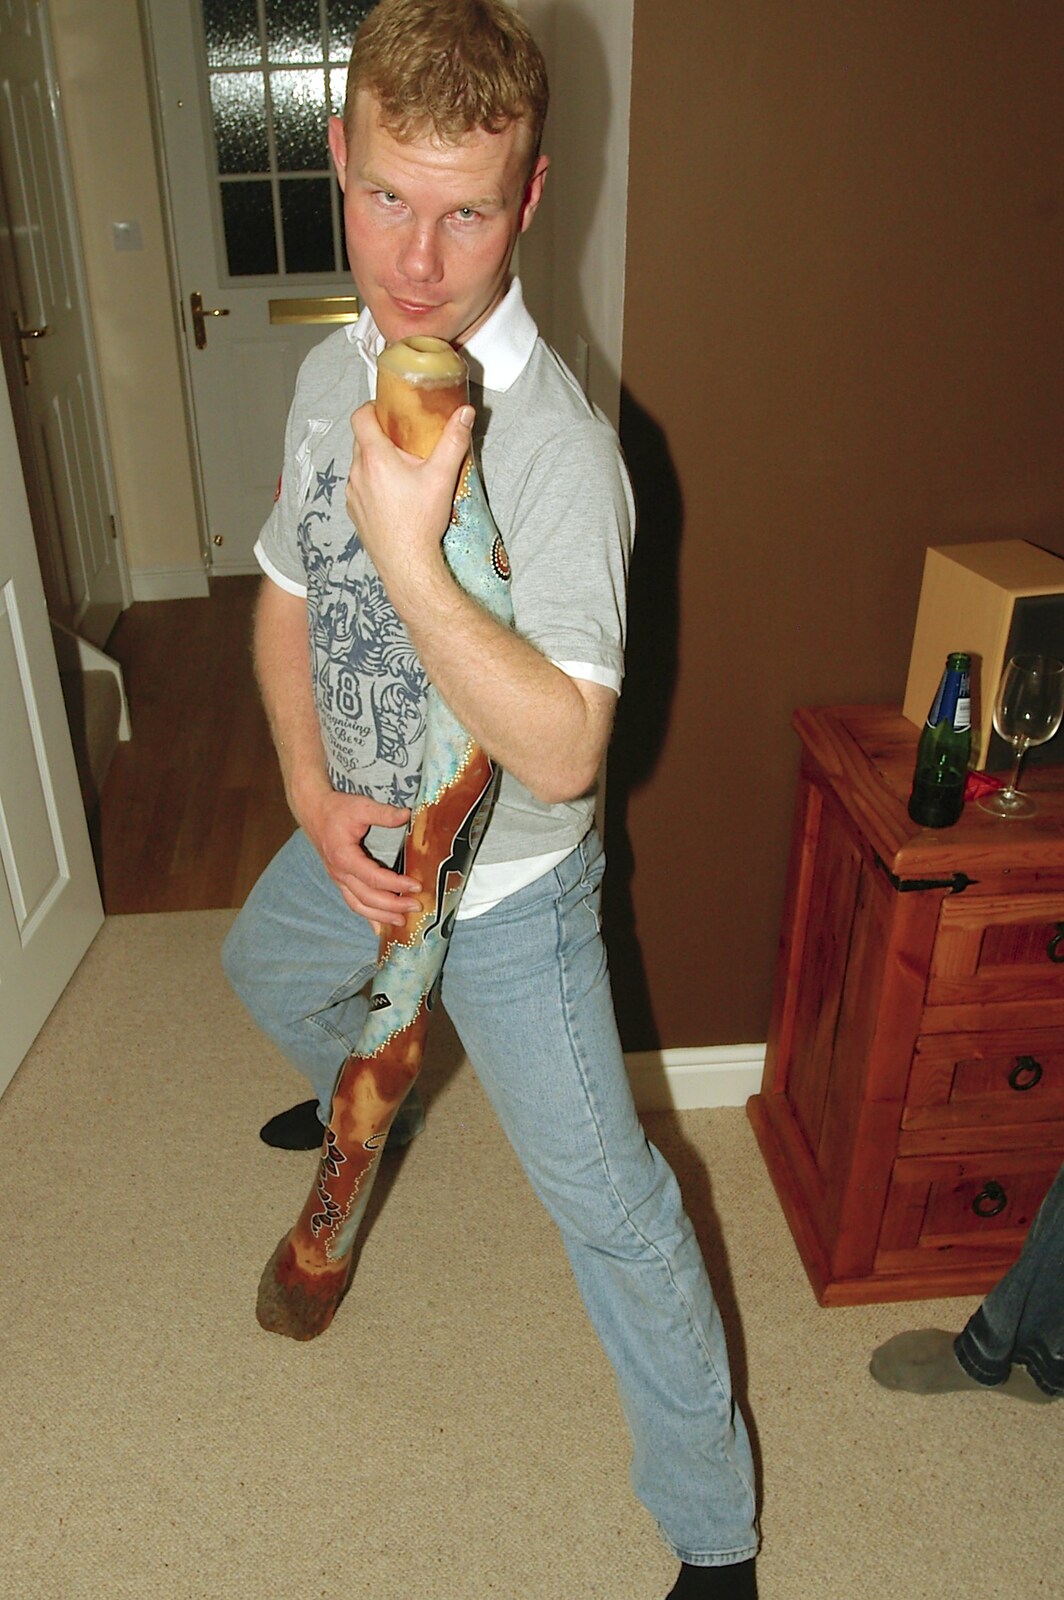 Mikey tarts it up with a didgeridoo from Fondue, Housewarmings and The Sock (An Epilogue), Cambridge and Diss - 29th September 2006